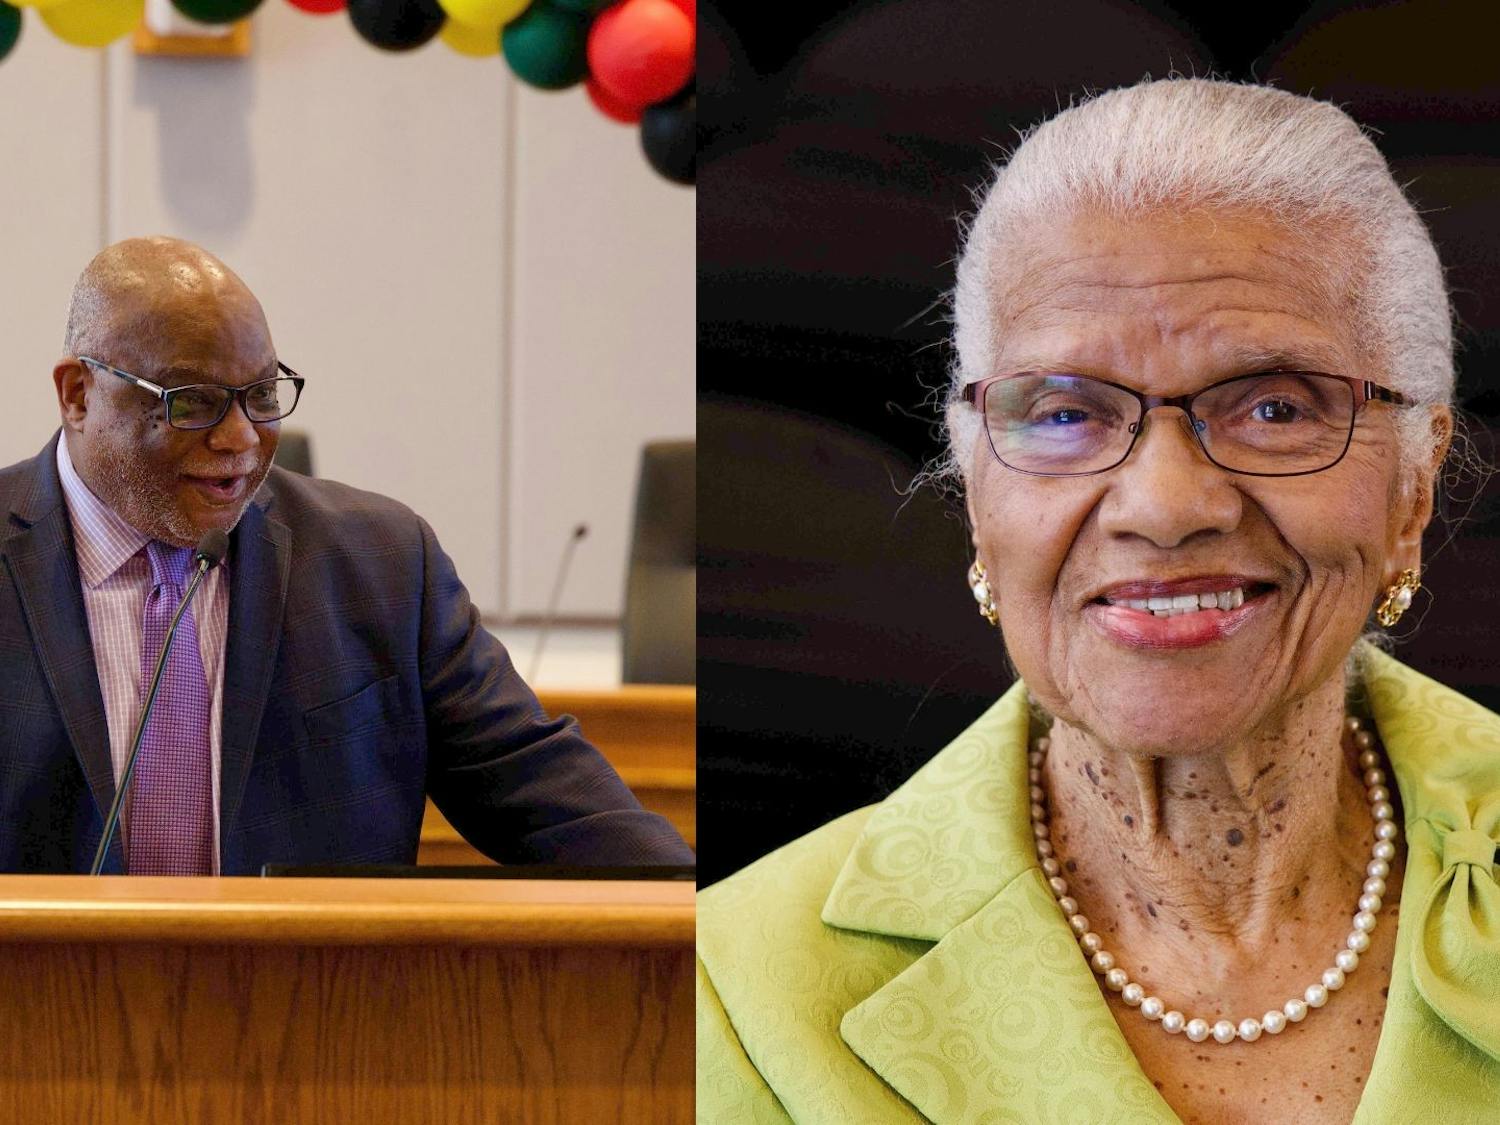 James E. Williams Jr. and Delores P. Simpson, the recipients of the 2023 Pauli Murray Award, are pictured.
Photo Courtesy of Tony Farrell.